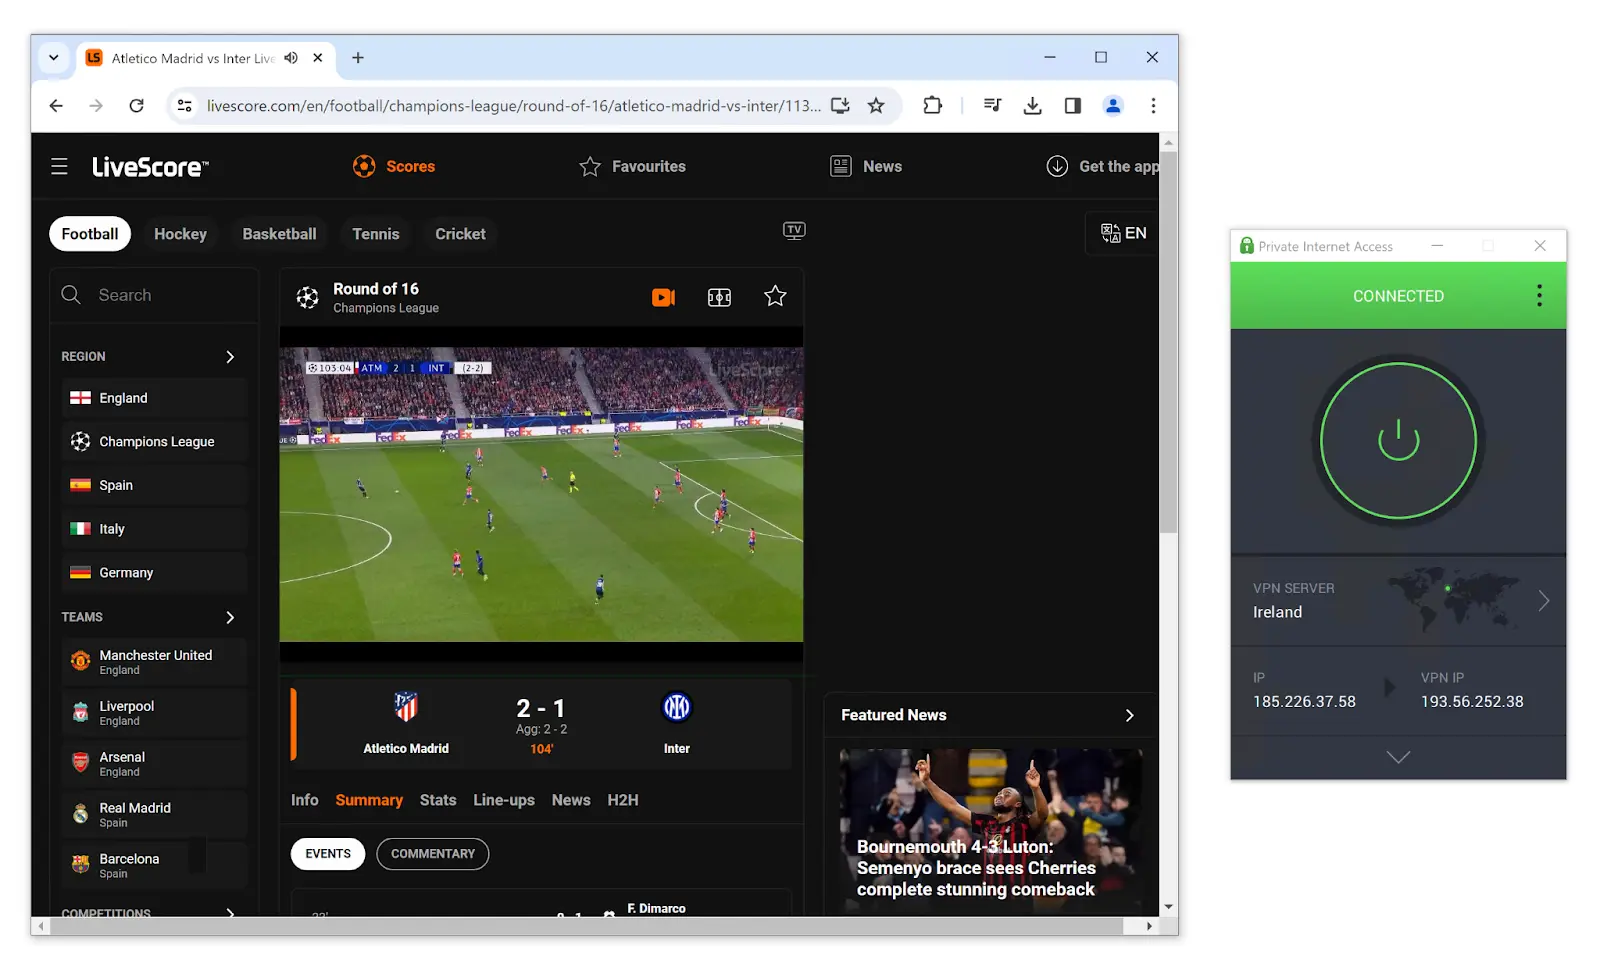 Using PIA VPN to unblock LiveScore and stream the UCL